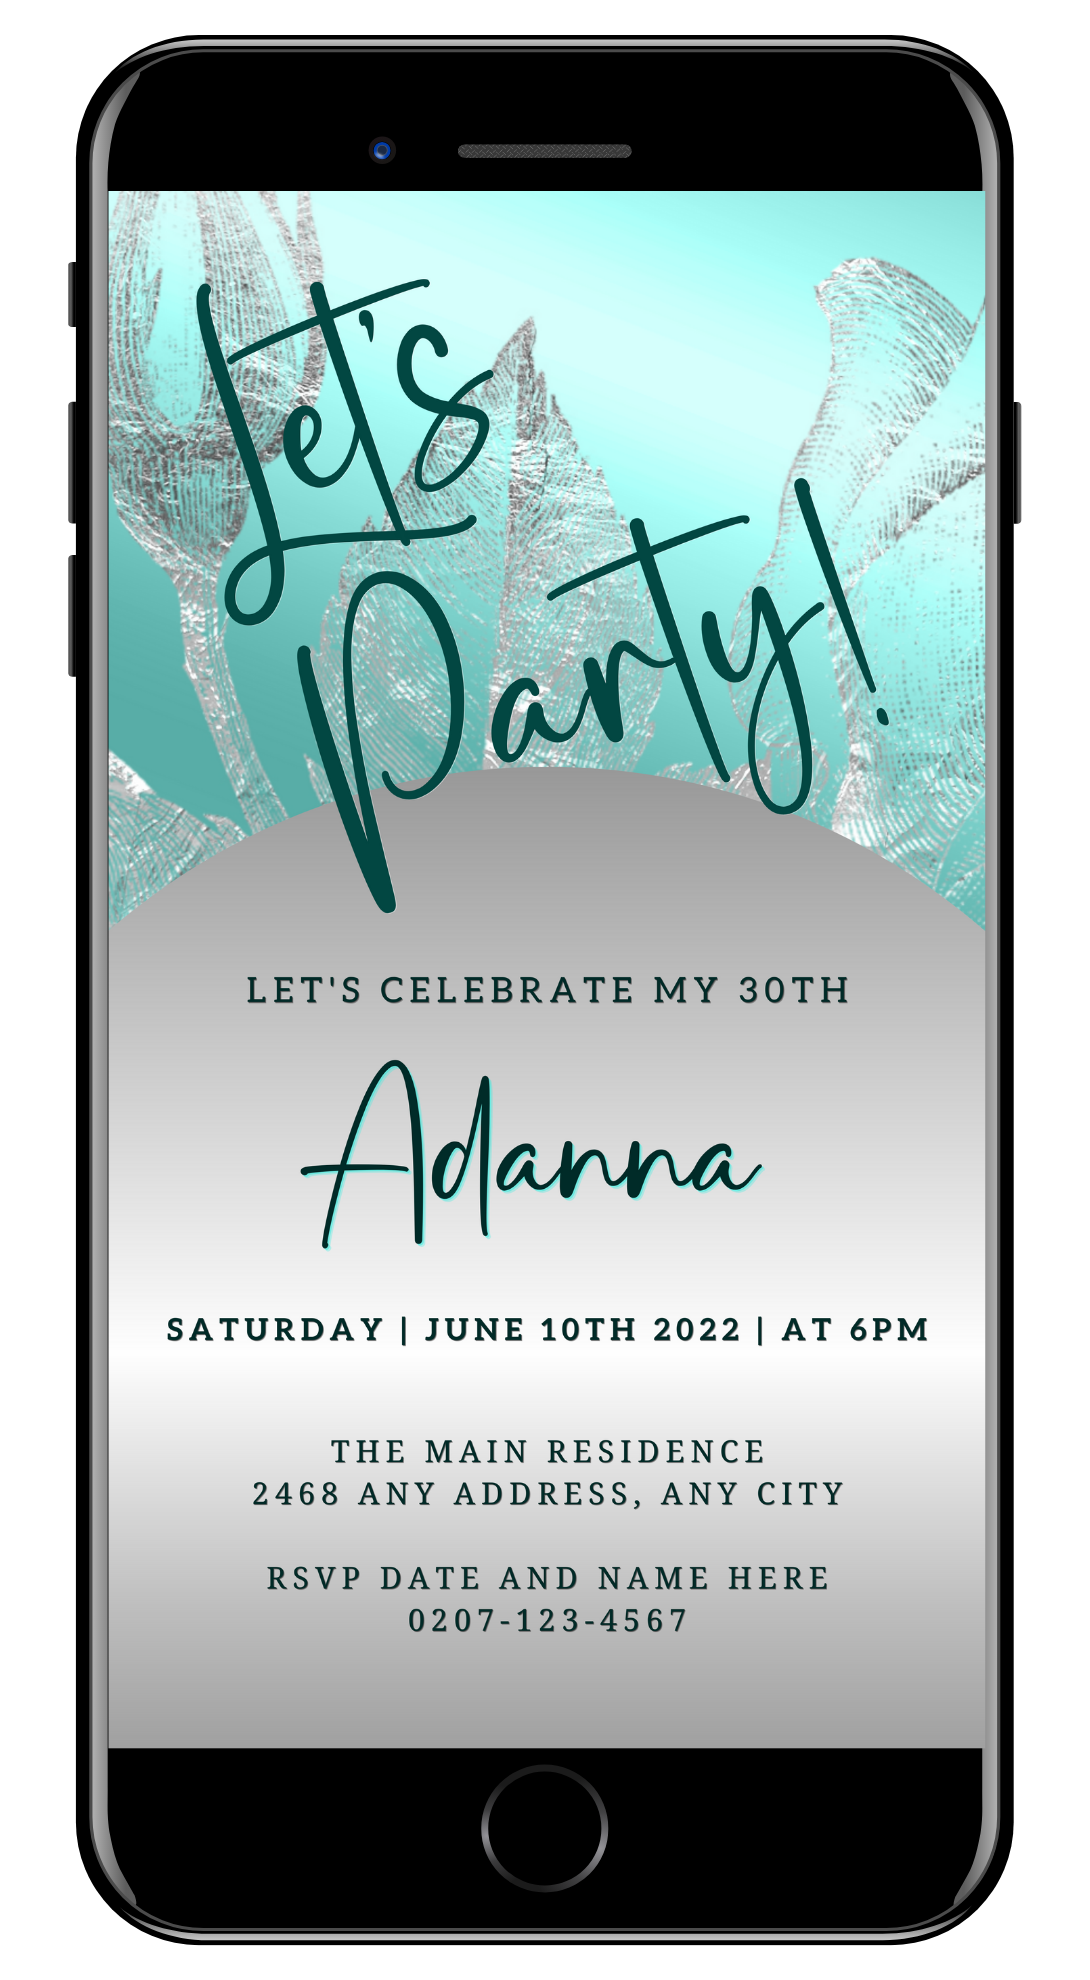 Elegant Teal Silver customisable digital party evite displayed on a smartphone screen, featuring editable text and design elements for easy personalization via Canva.